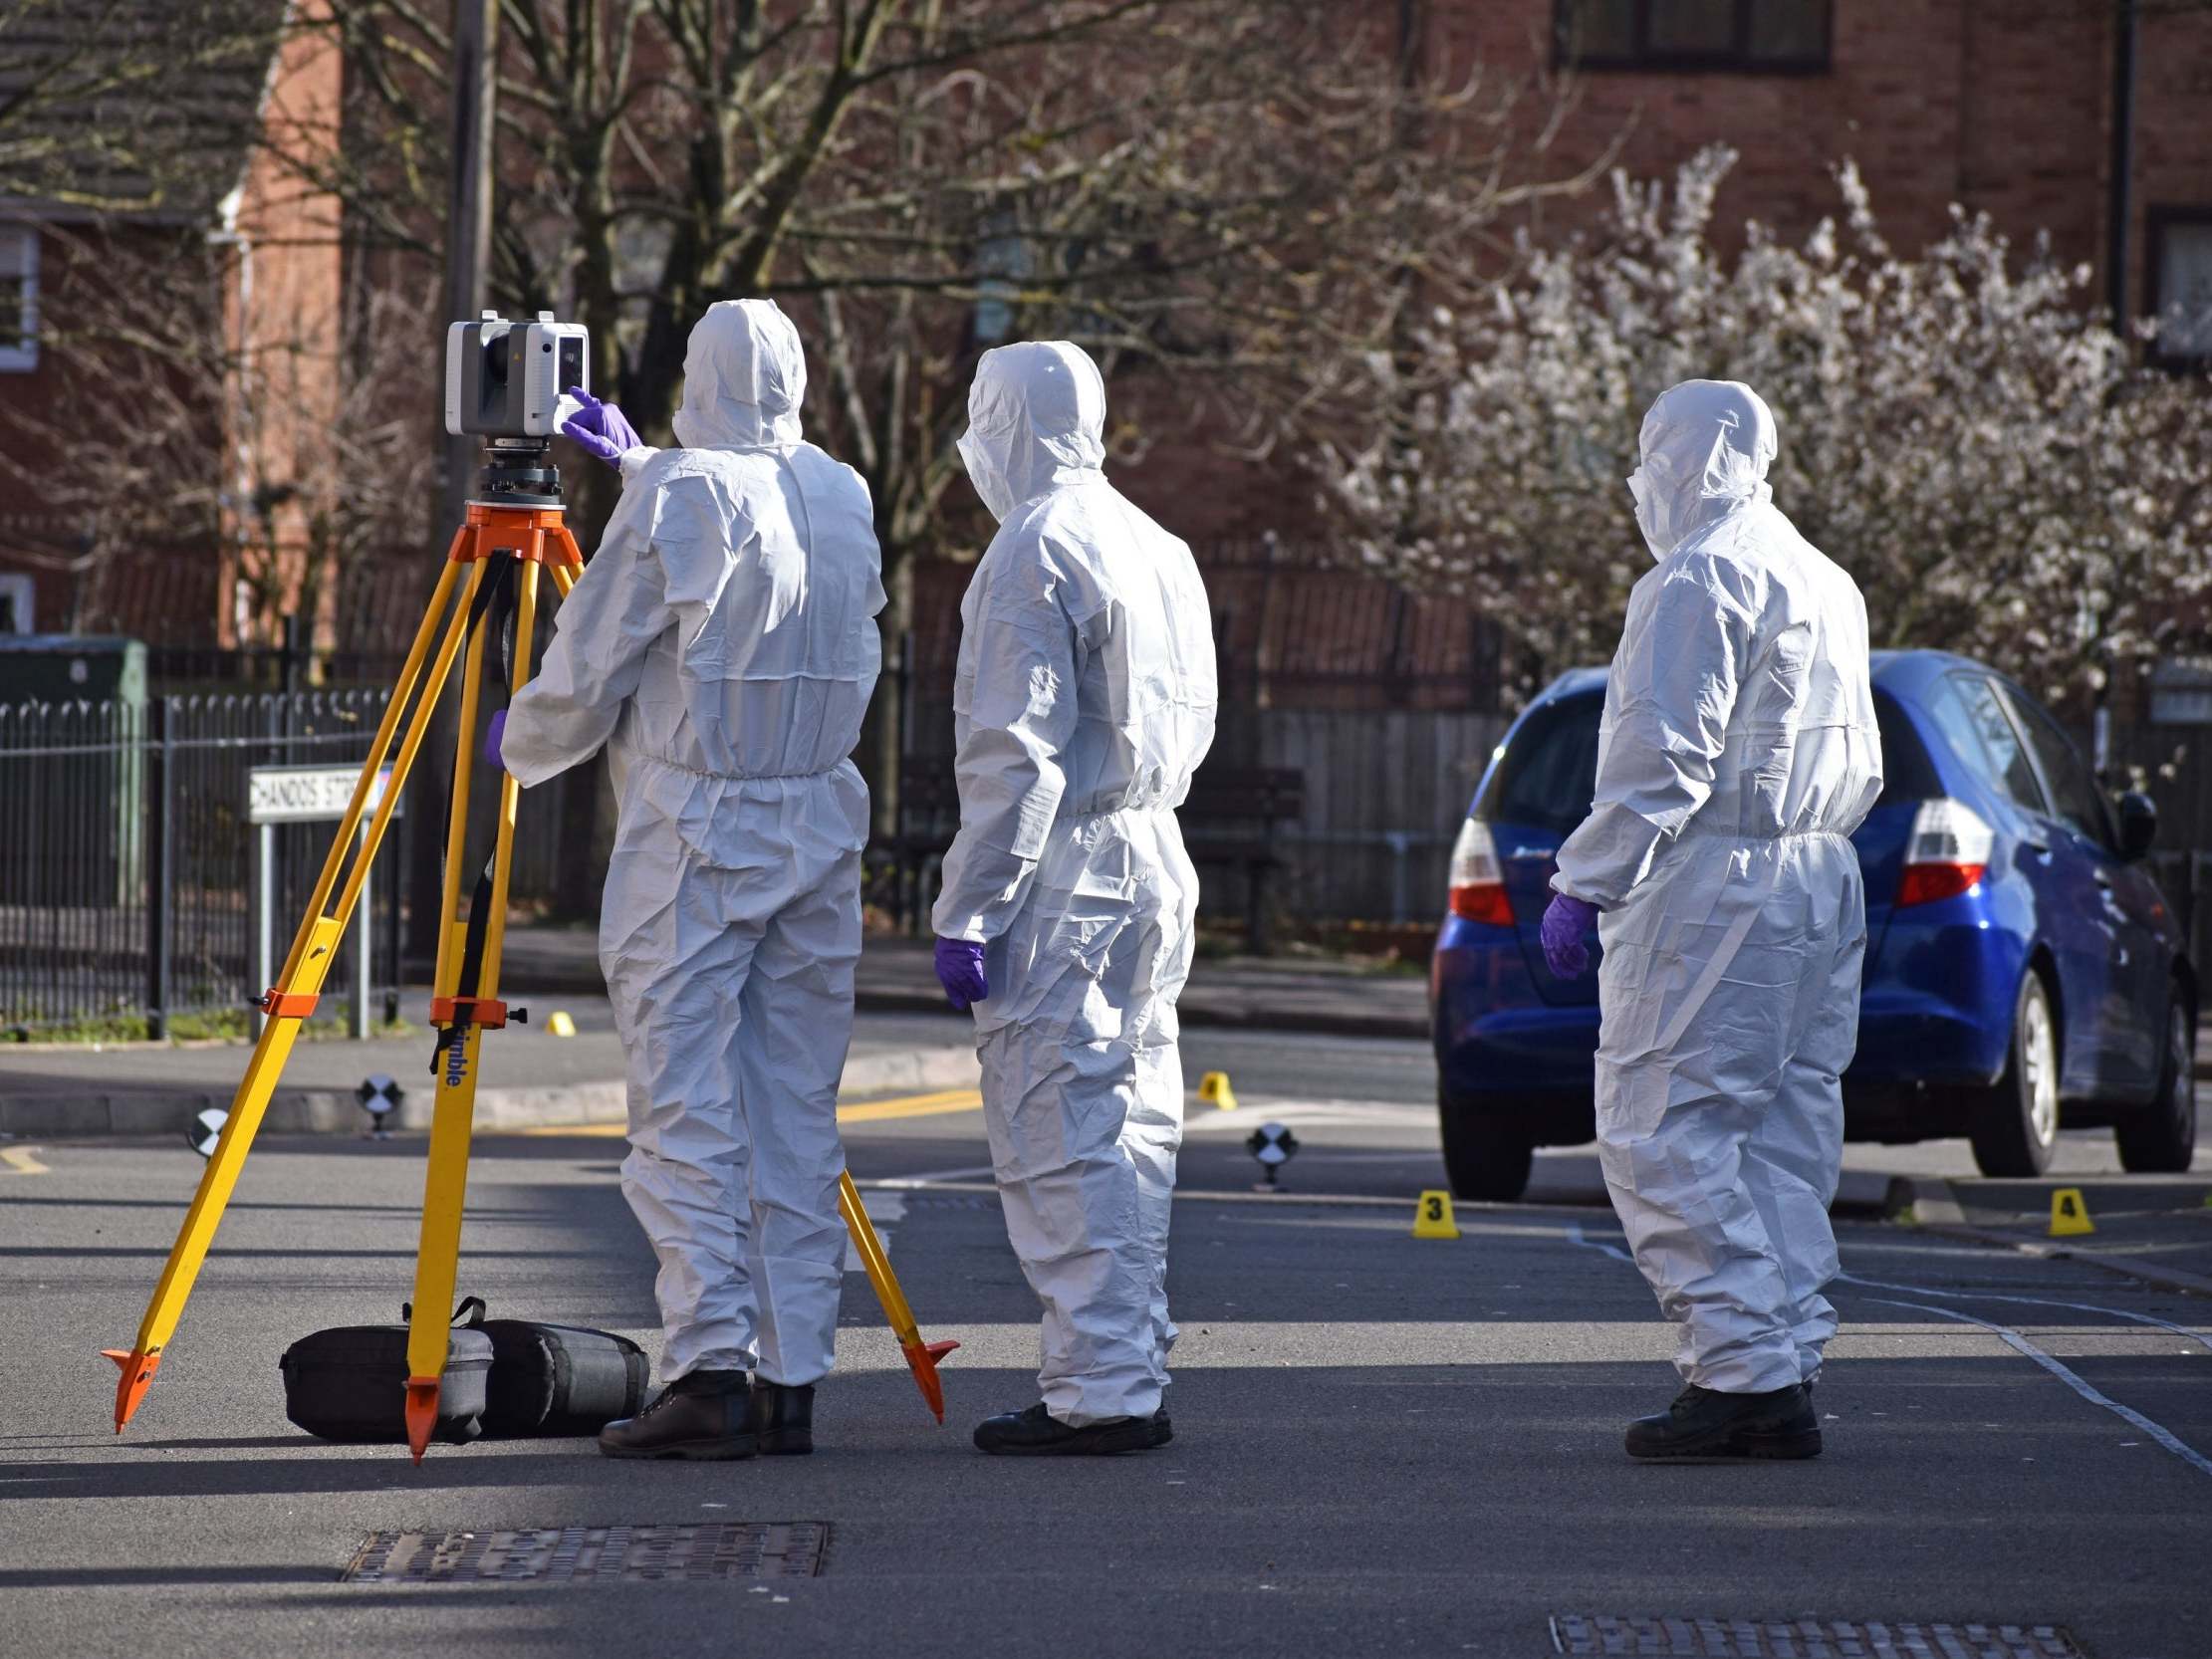 Police forensics officers in Chandos Street, Coventry, on 1 March 2020 after the death of a 16-year-old boy was stabbed to death overnight.